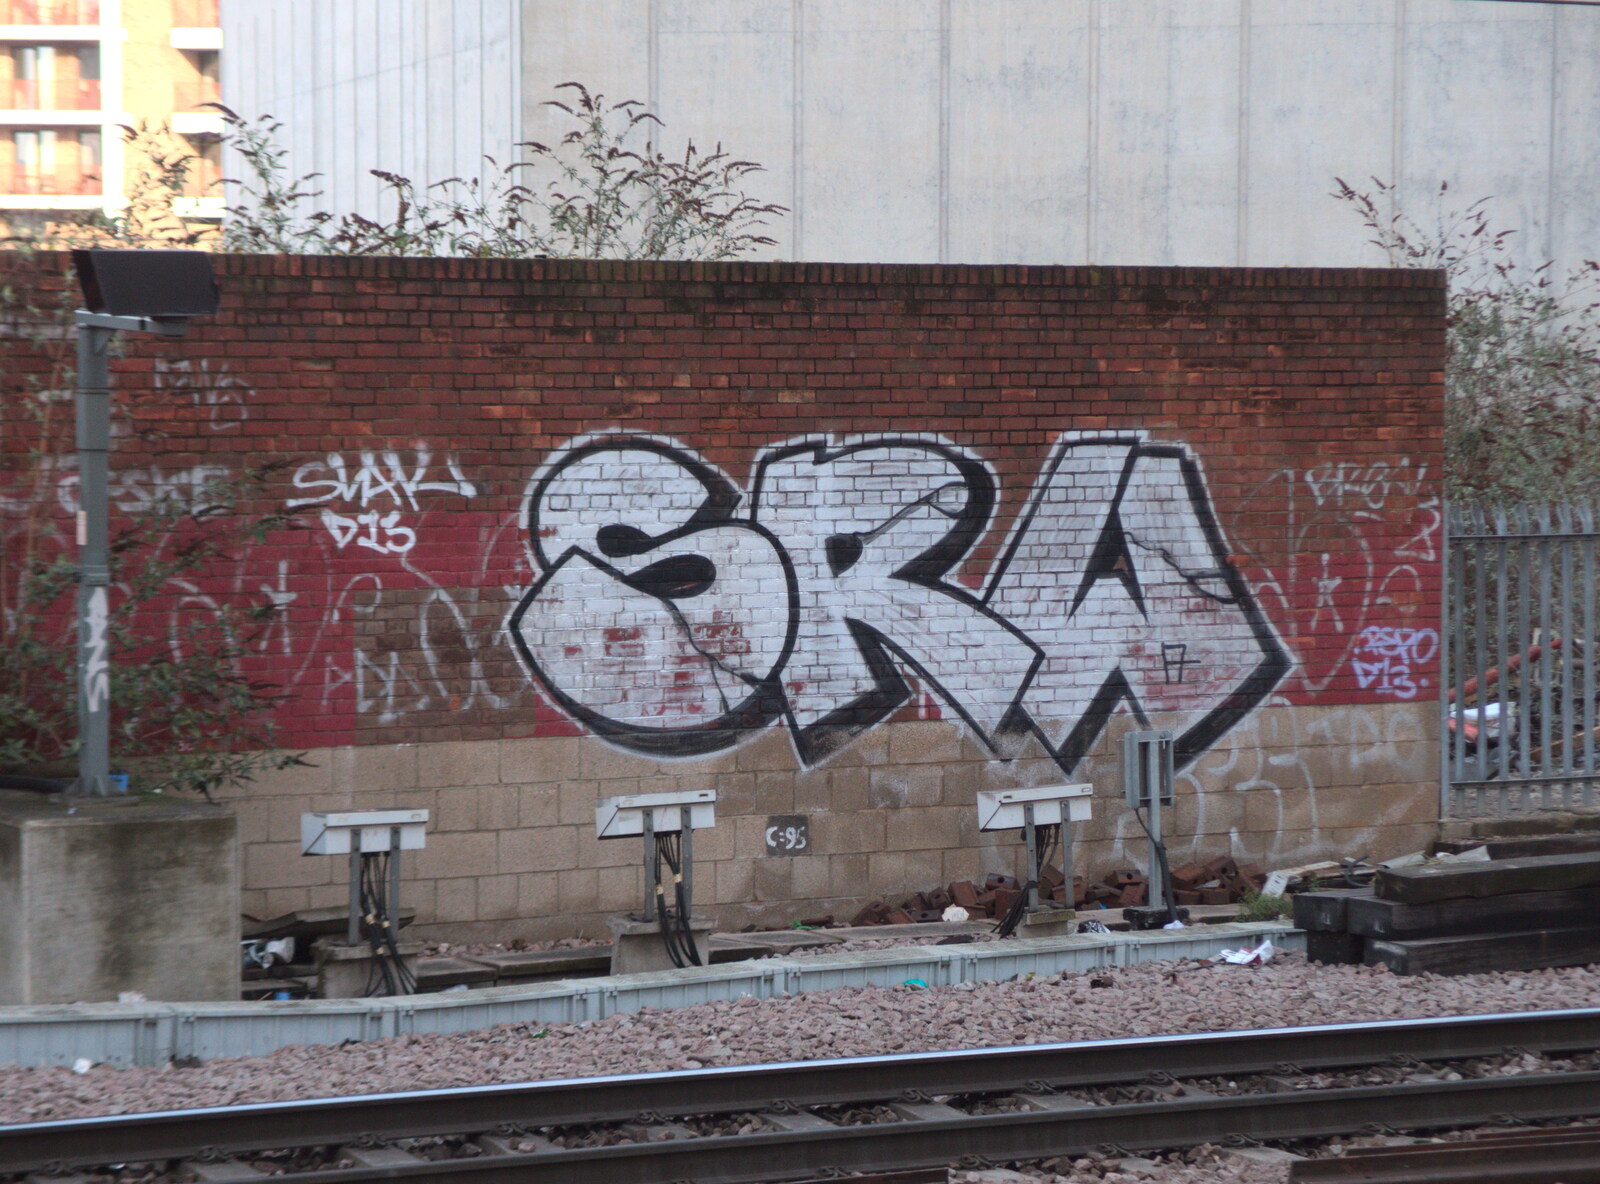 Broken-down Freight Trains, Manor Park, London - 28th January 2020: SRW tag on a wall near Stratford